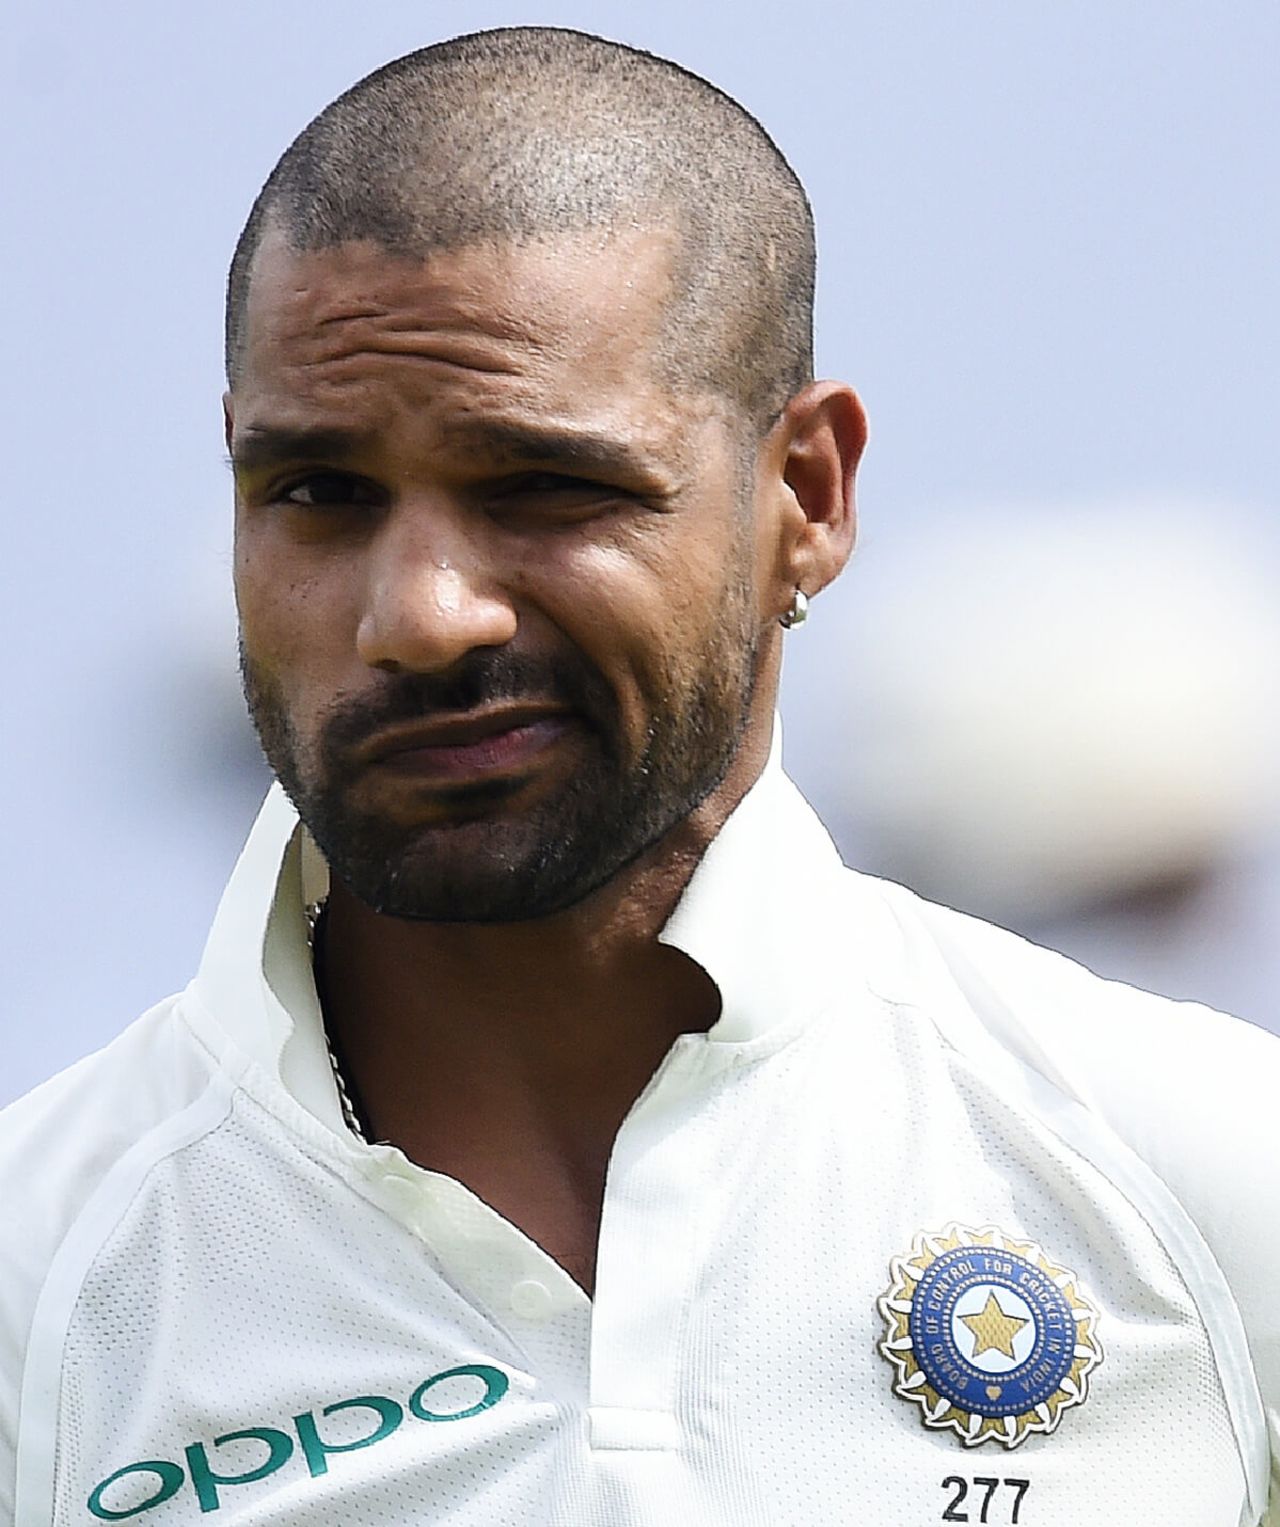 Shikhar Dhawan makes a face after being dismissed, Sri Lanka v India, 1st Test, Galle, 1st day, July 26, 2017